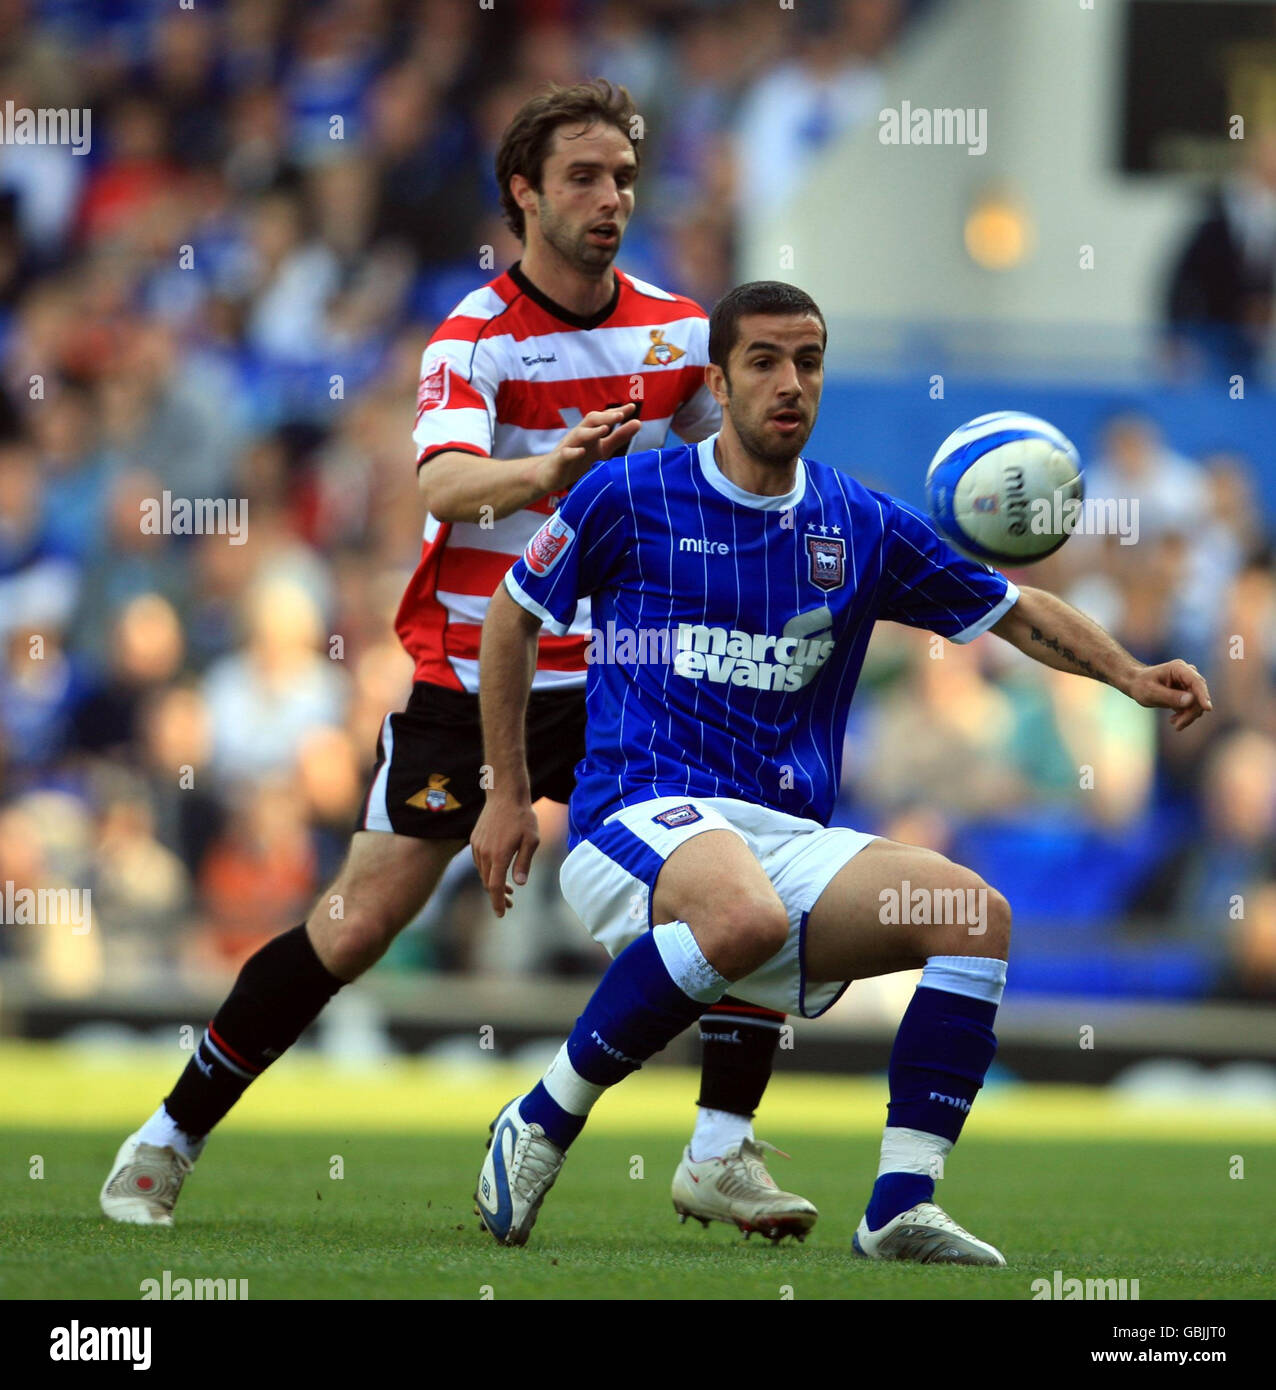 Ipswich Town's Pablo Counago (front) and Doncaster Rovers' Mark Wilson (back) battle for the ball during the Coca-Cola Football League Championship match at Portman Road, Ipswich. Stock Photo